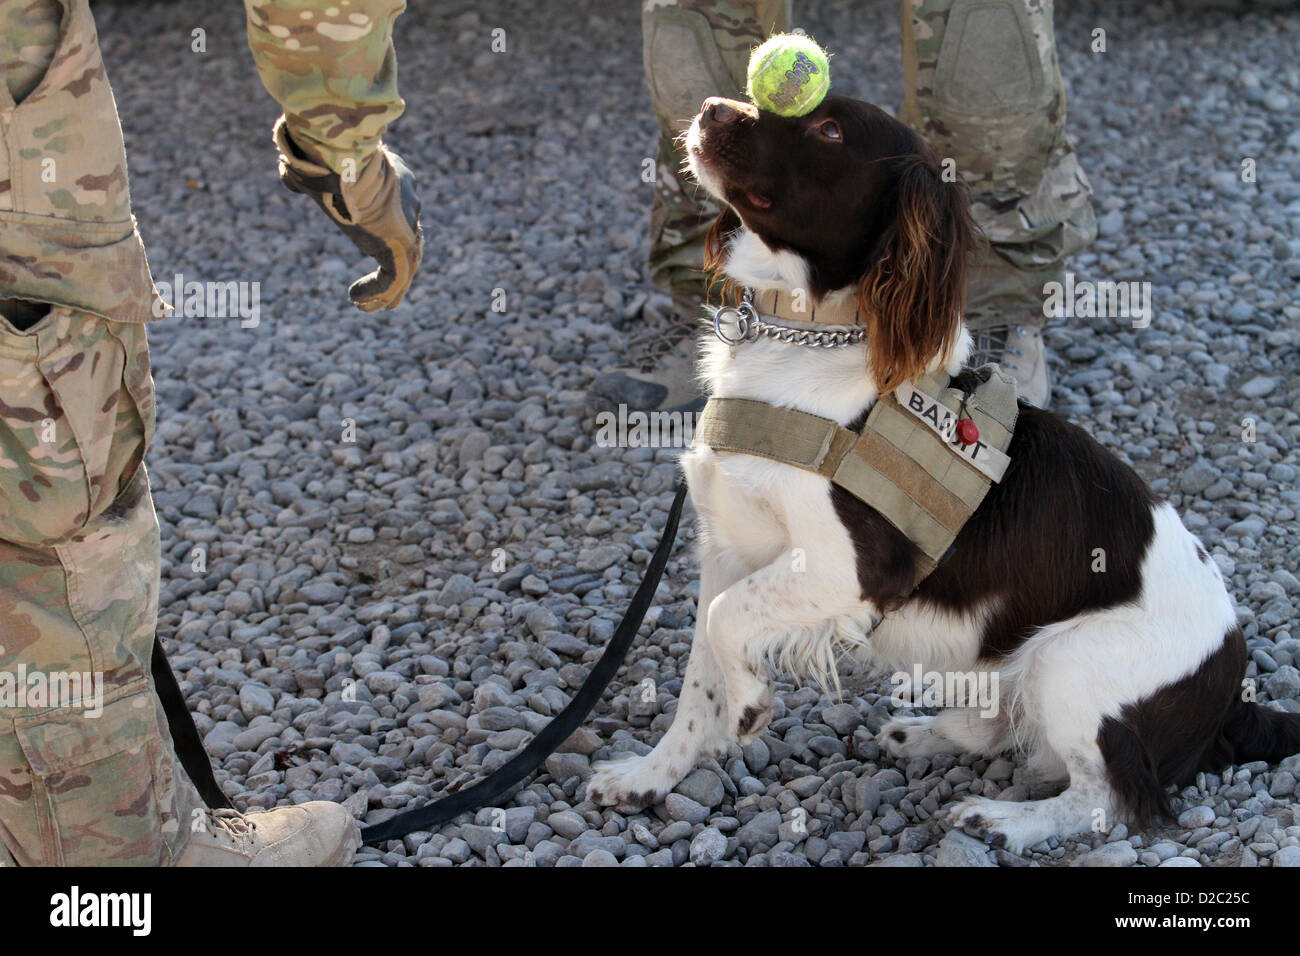 Bandit, a military working dog balances a tennis ball on his nose during a security operation January 19, 2-13 in Farah province, Afghanistan. Stock Photo